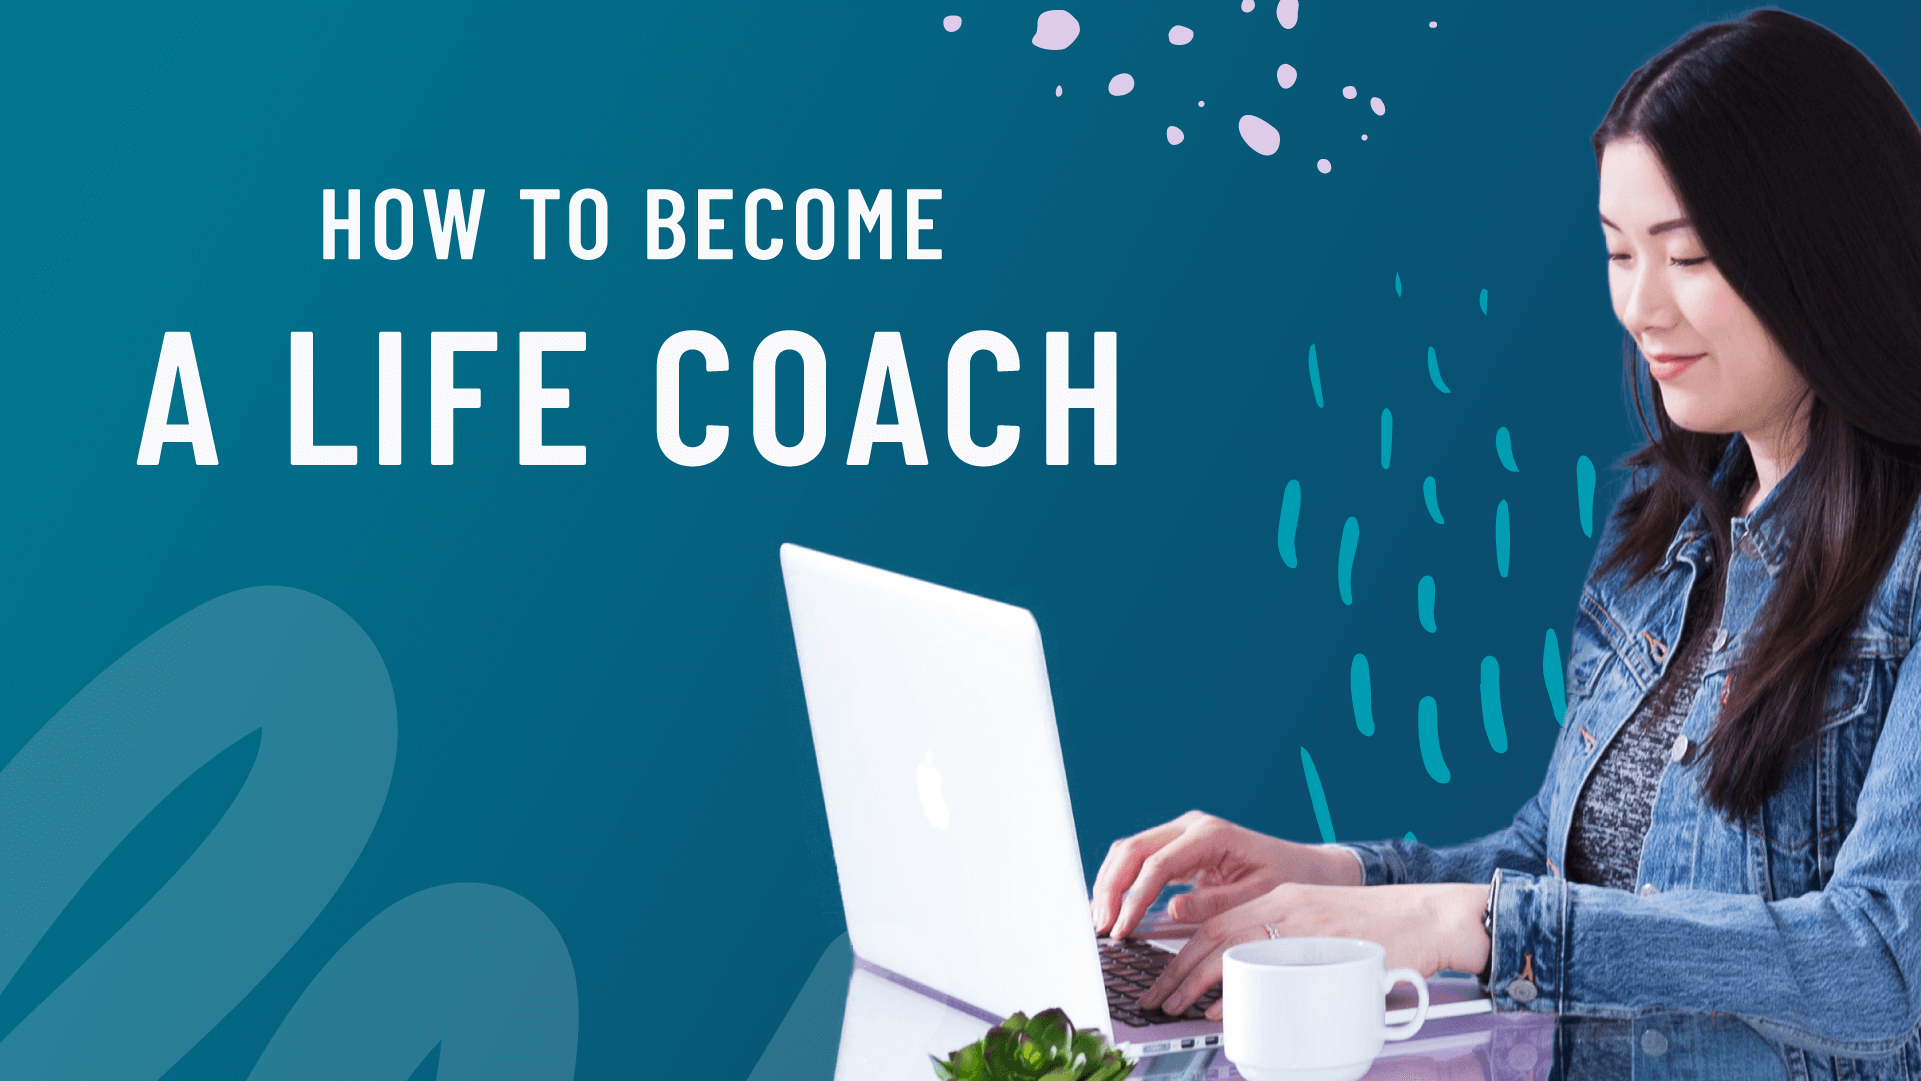 5 Steps to Becoming a Life Coach